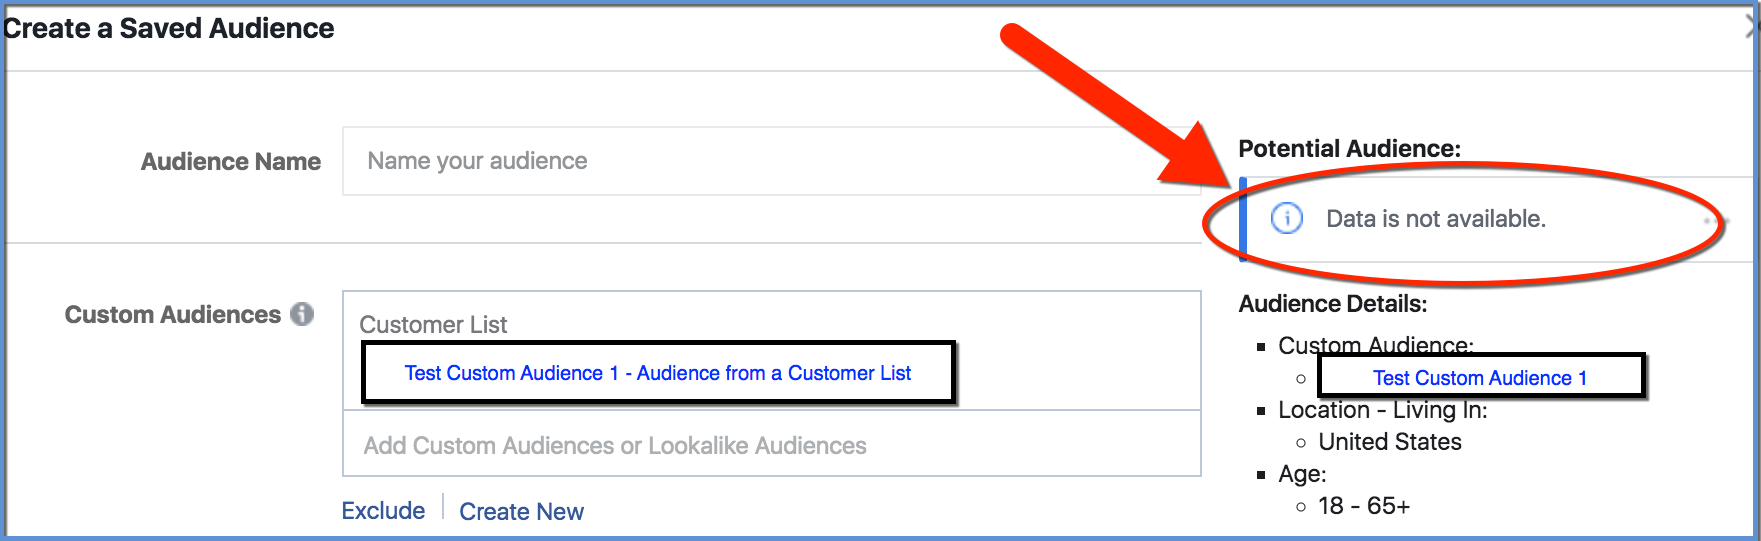 Facebook Custom Audience - used as base for Saved Audience - Size not available